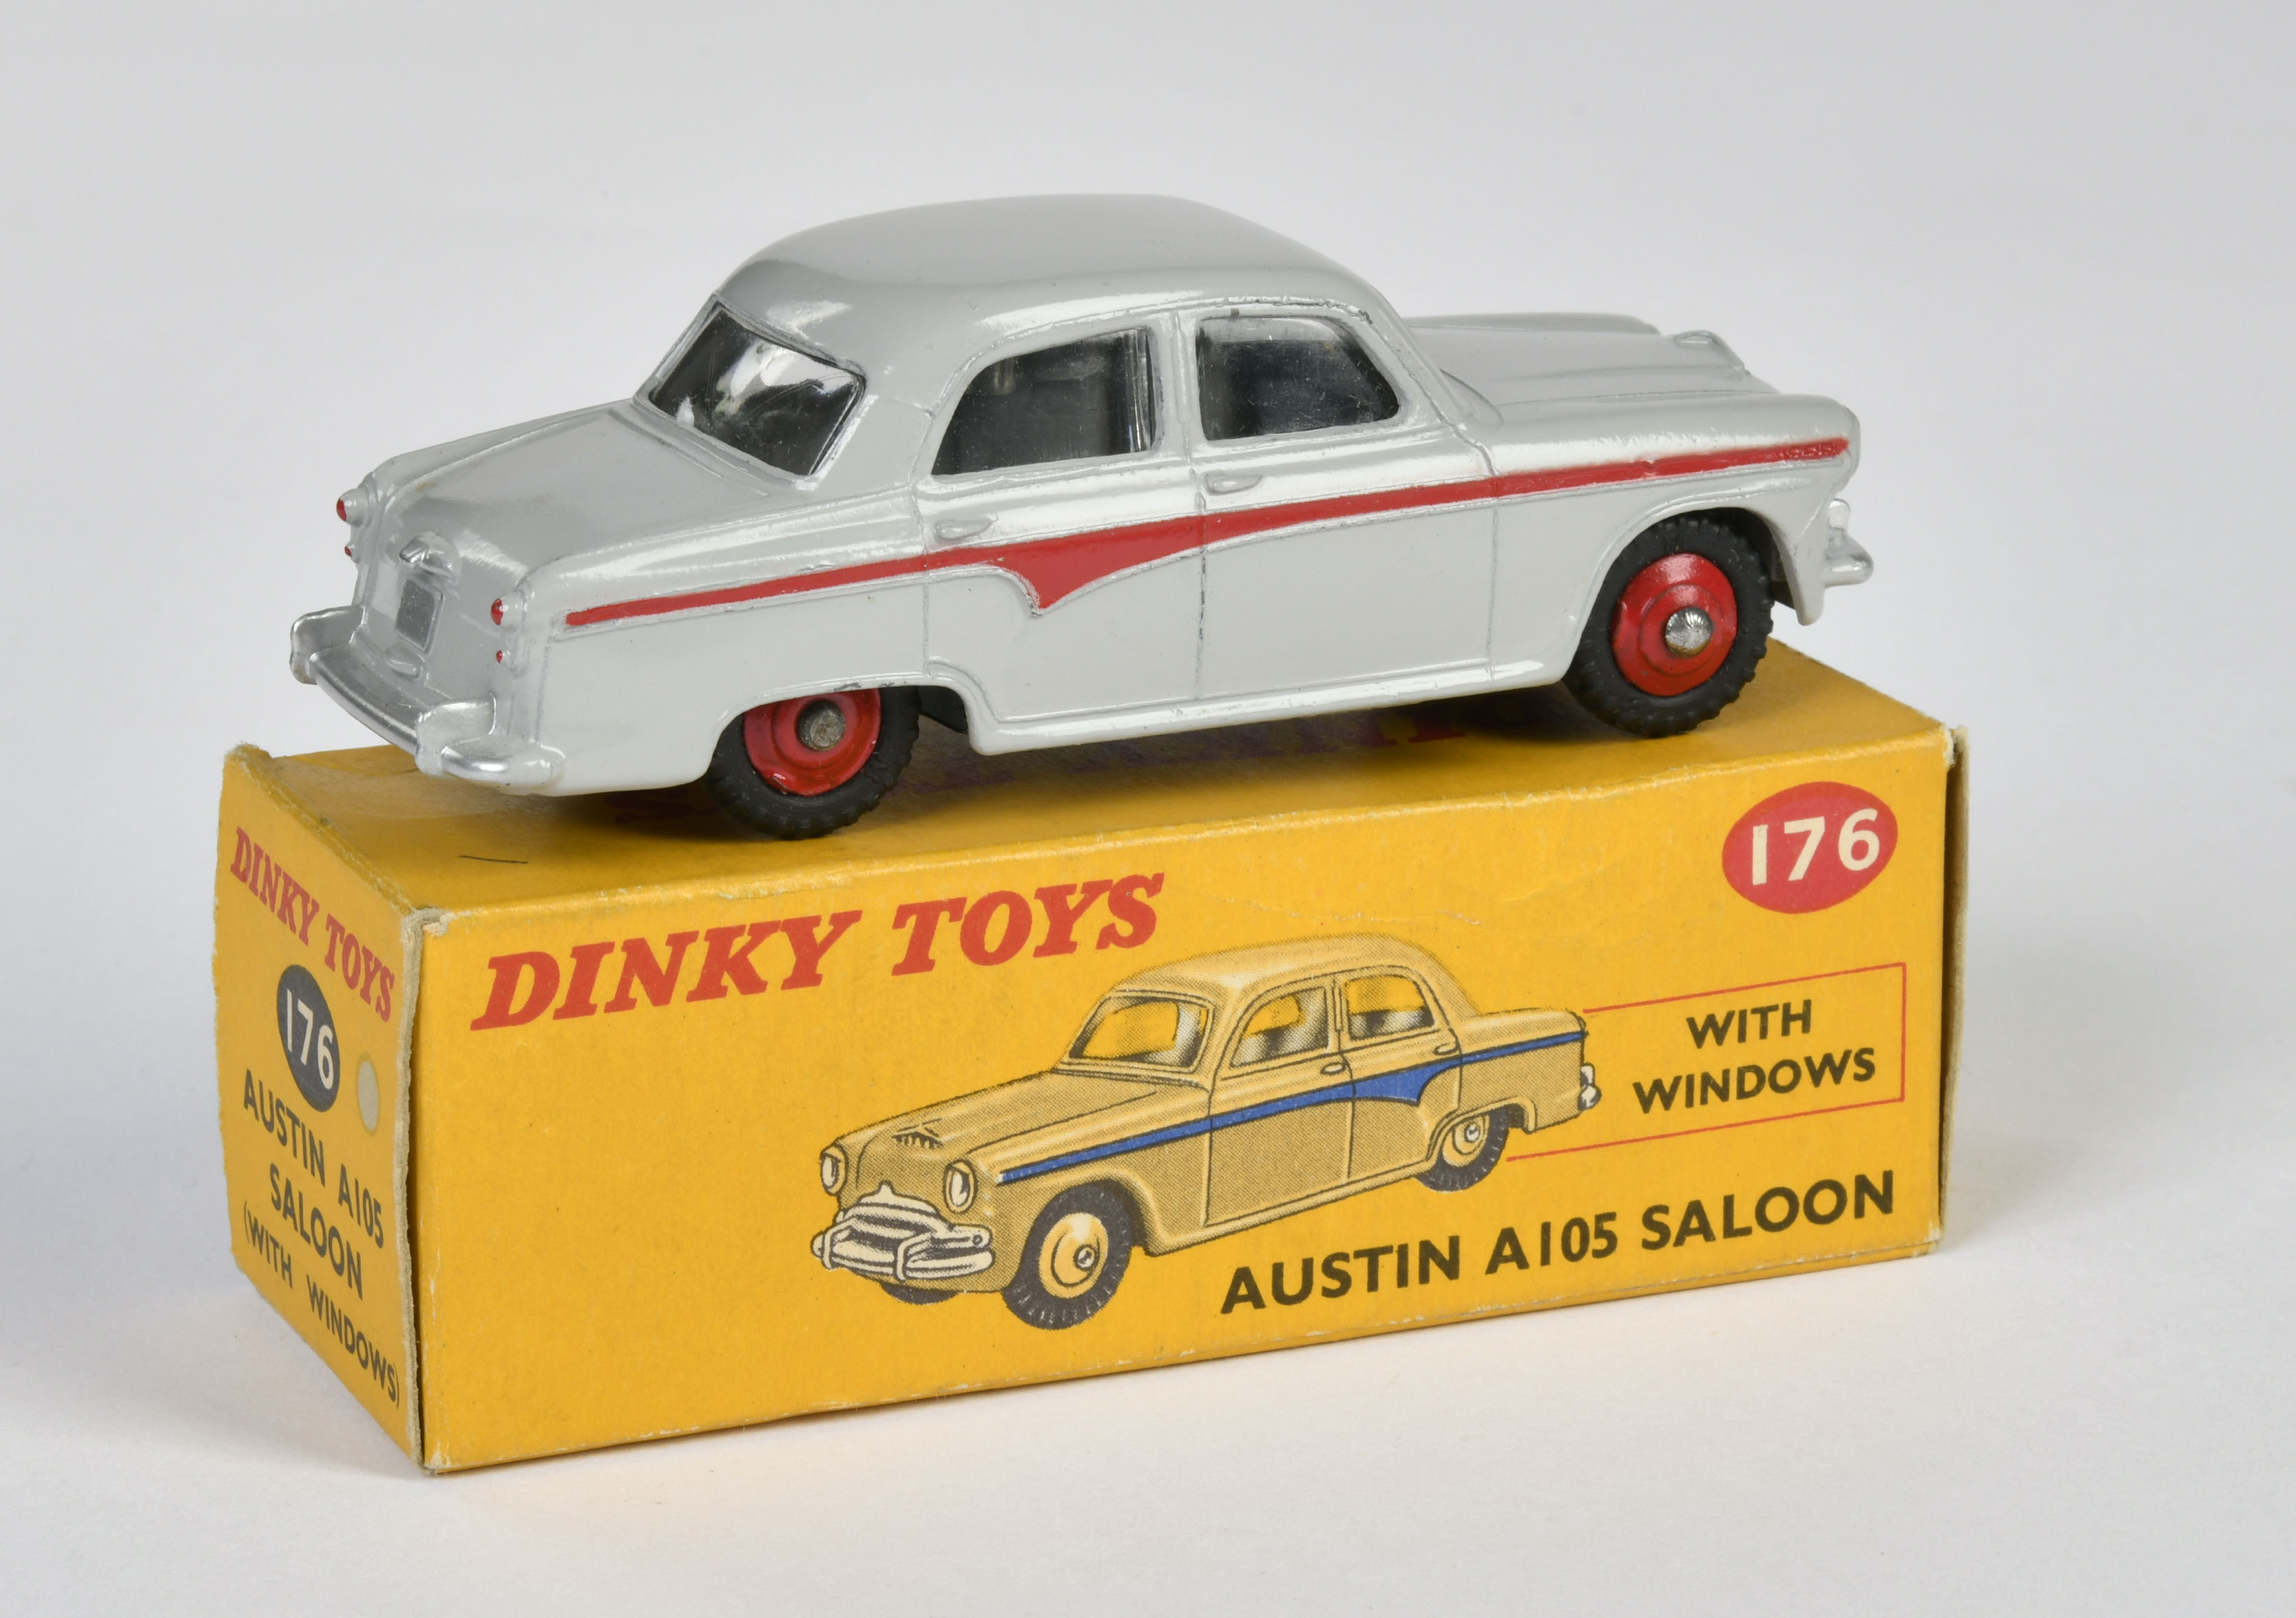 Dinky Toys, 176 Austin Saloon, grey/red, England, 1:43, diecast, box C 1, C 1 - Image 2 of 2